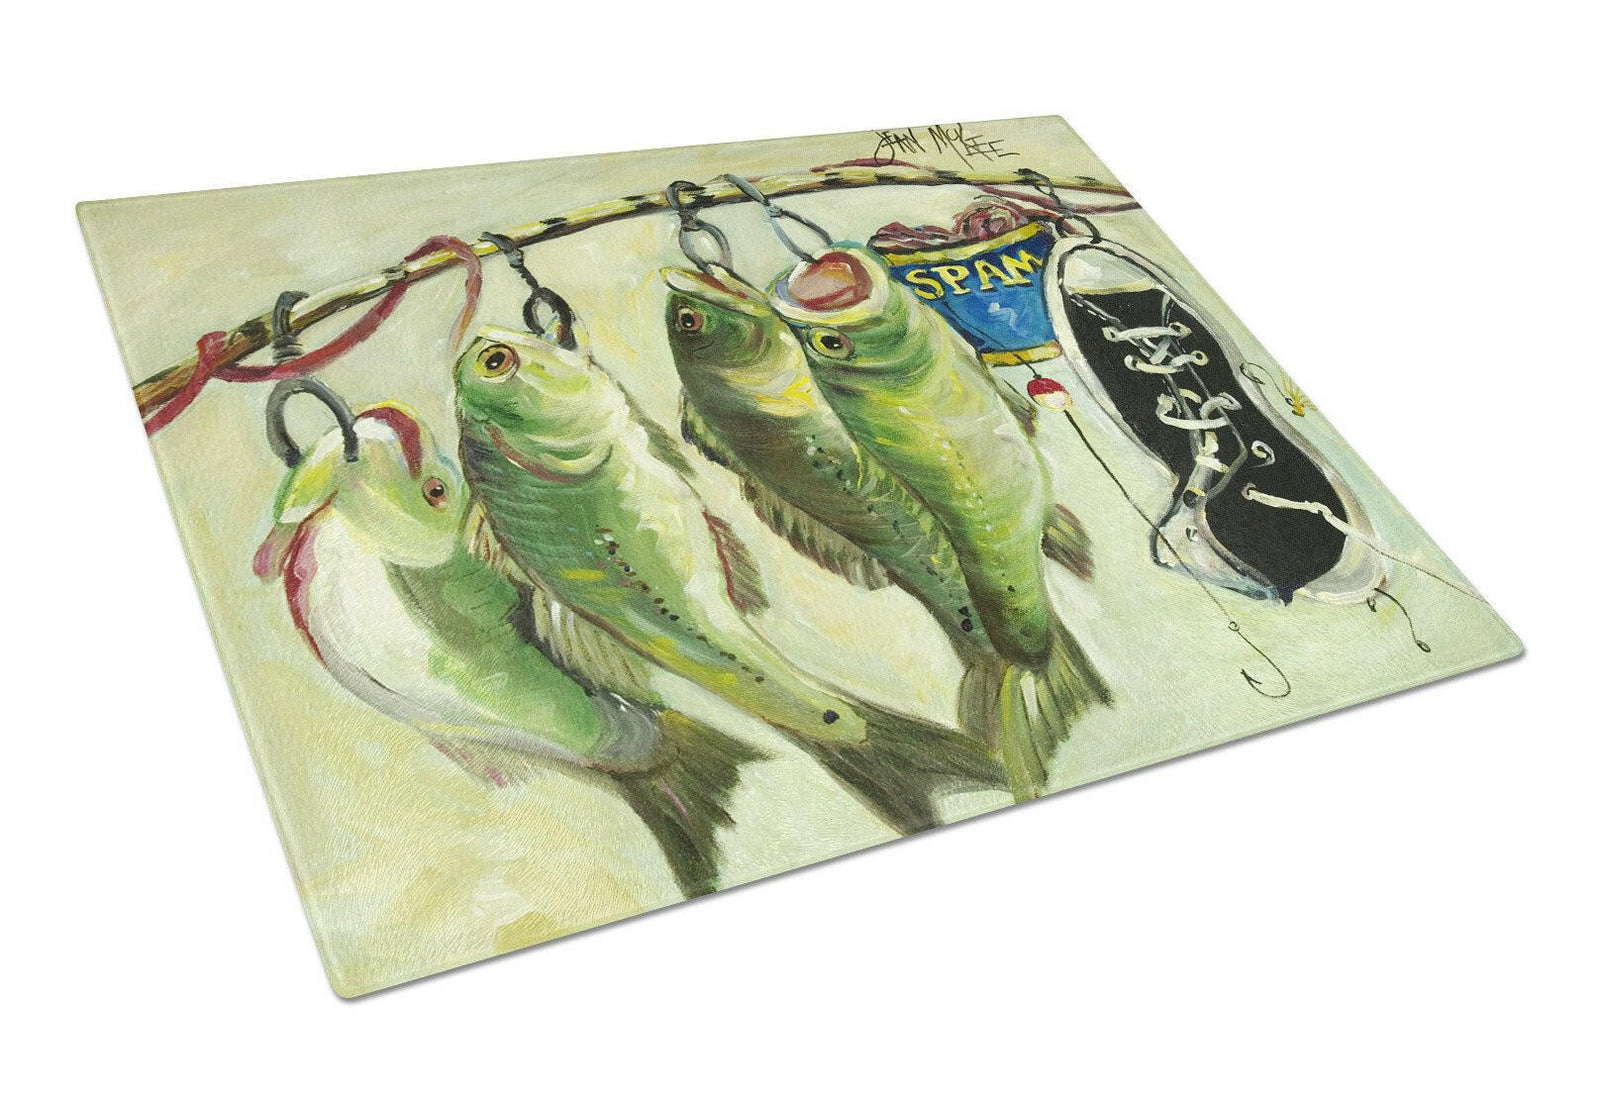 Recession Food Fish caught with Spam Glass Cutting Board Large JMK1113LCB by Caroline's Treasures